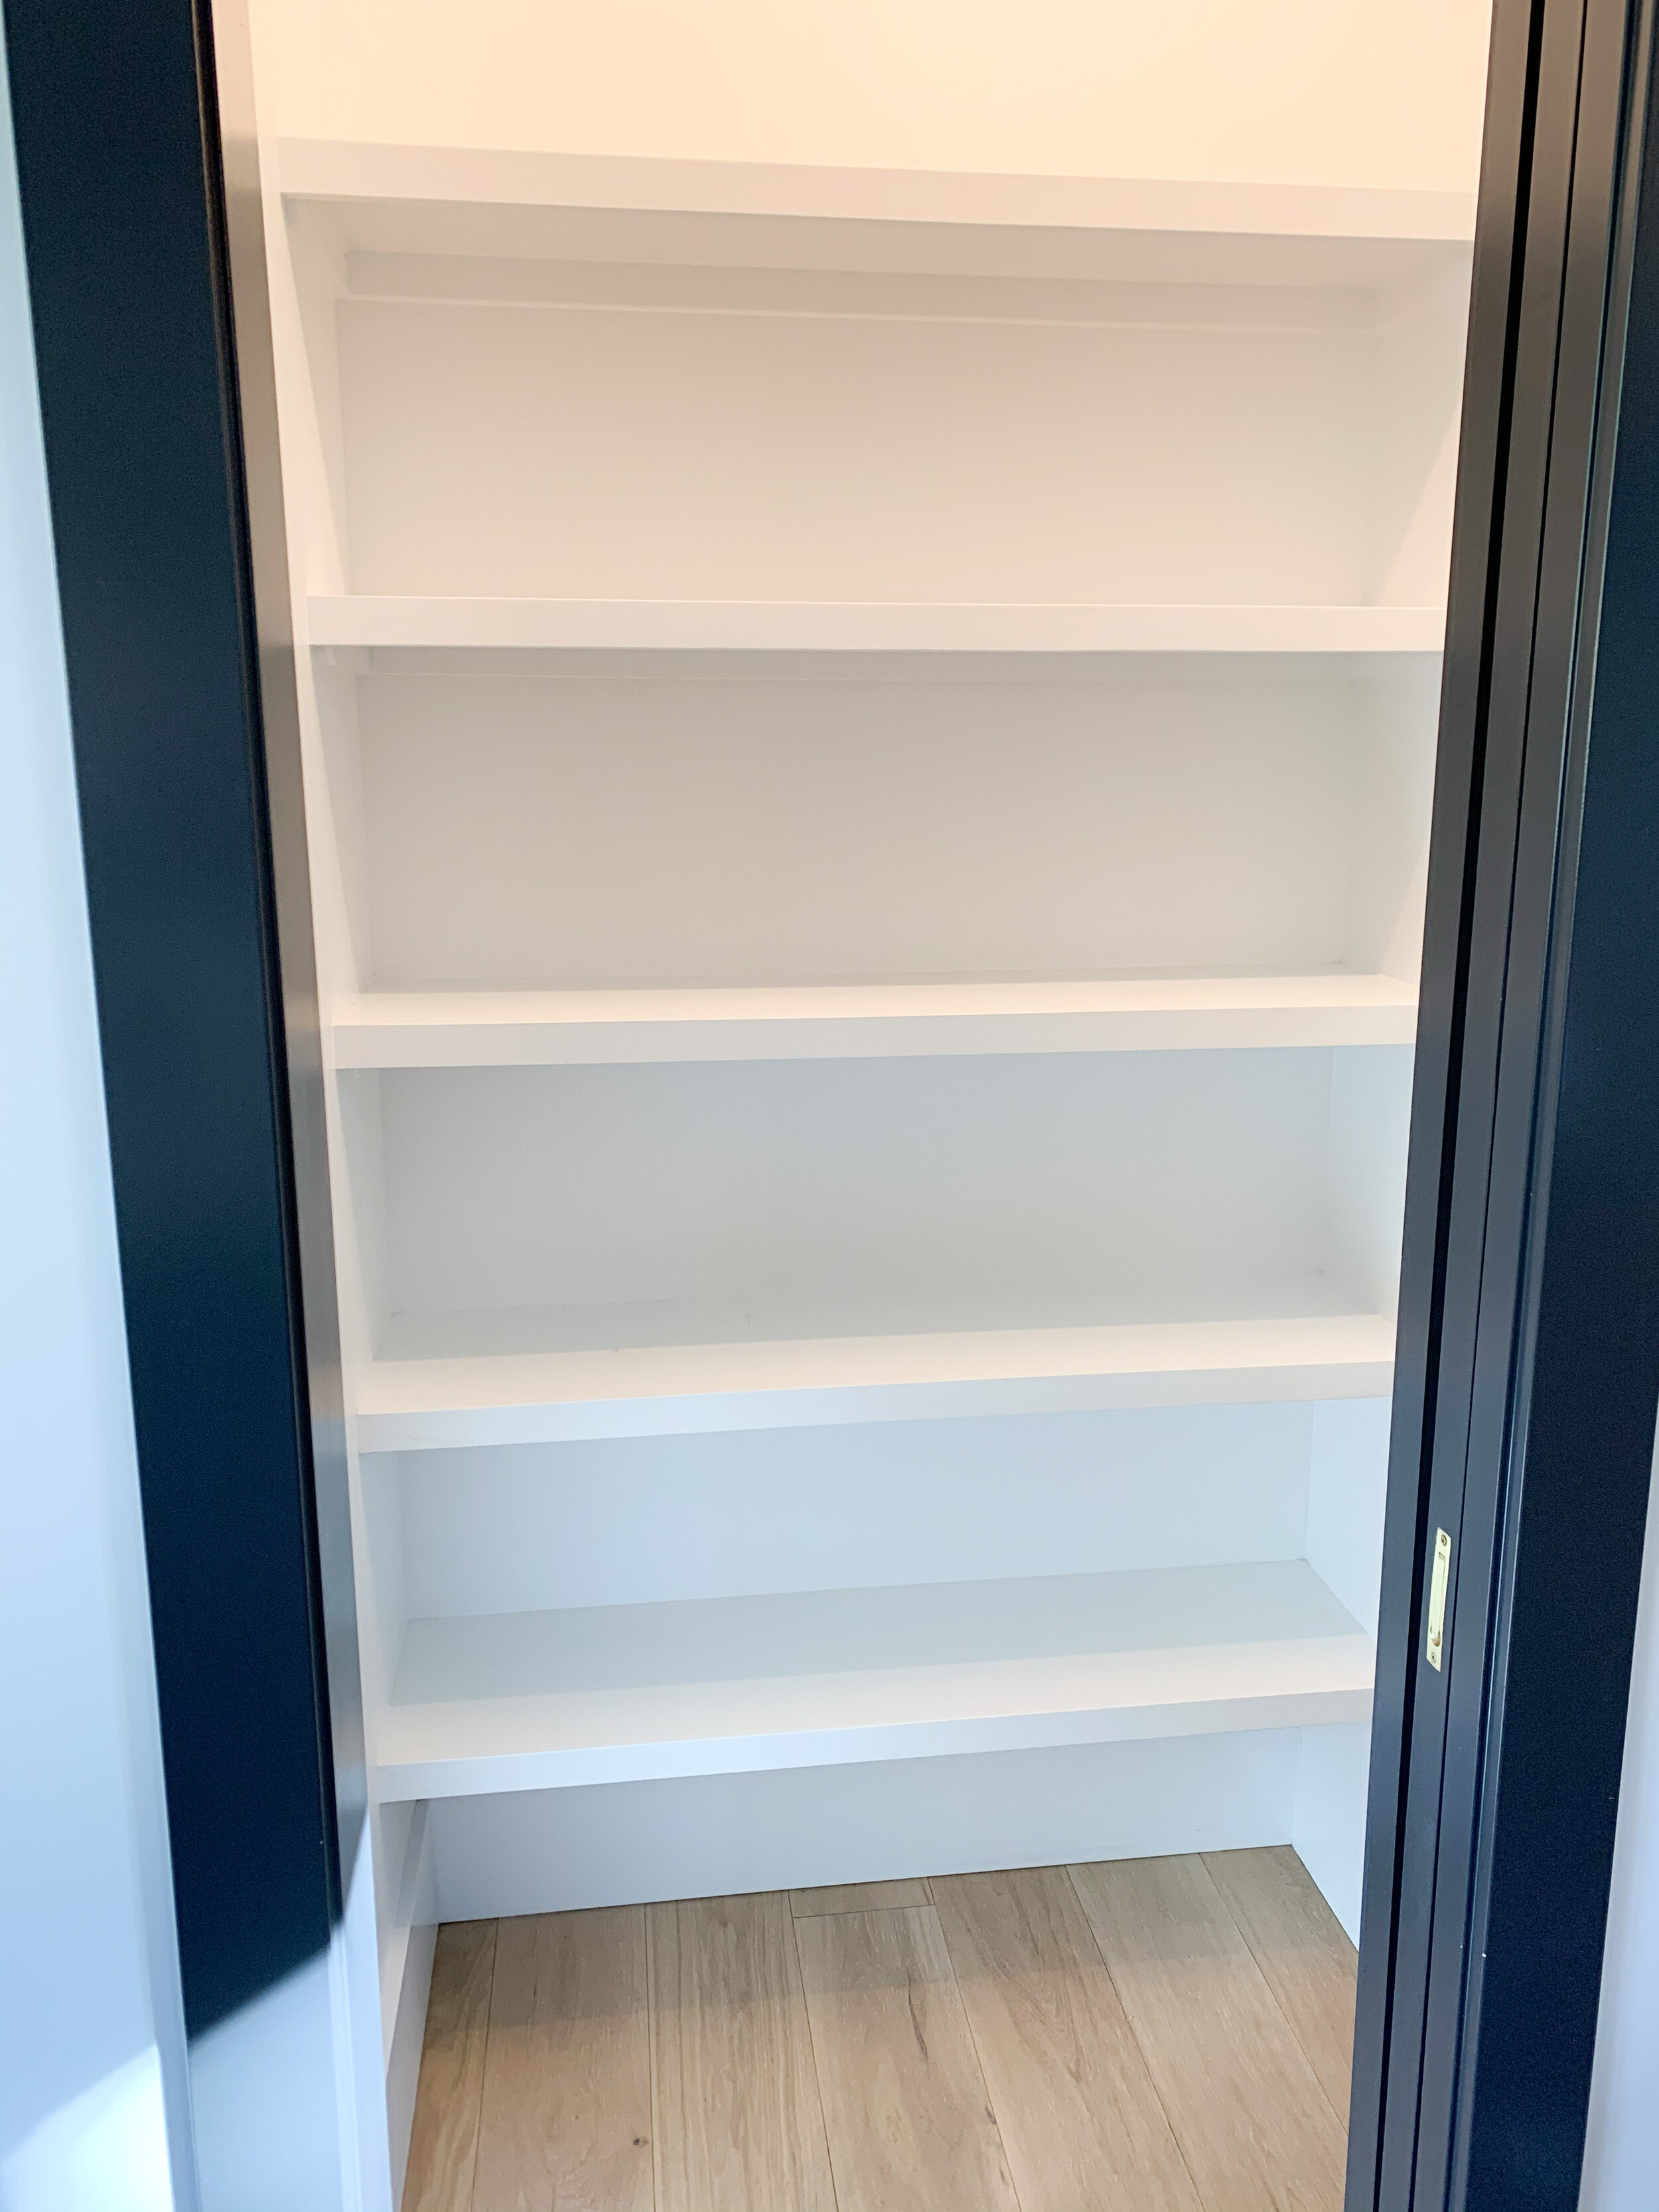 Pantry BEFORE - a clean slate for us to set up organization systems!